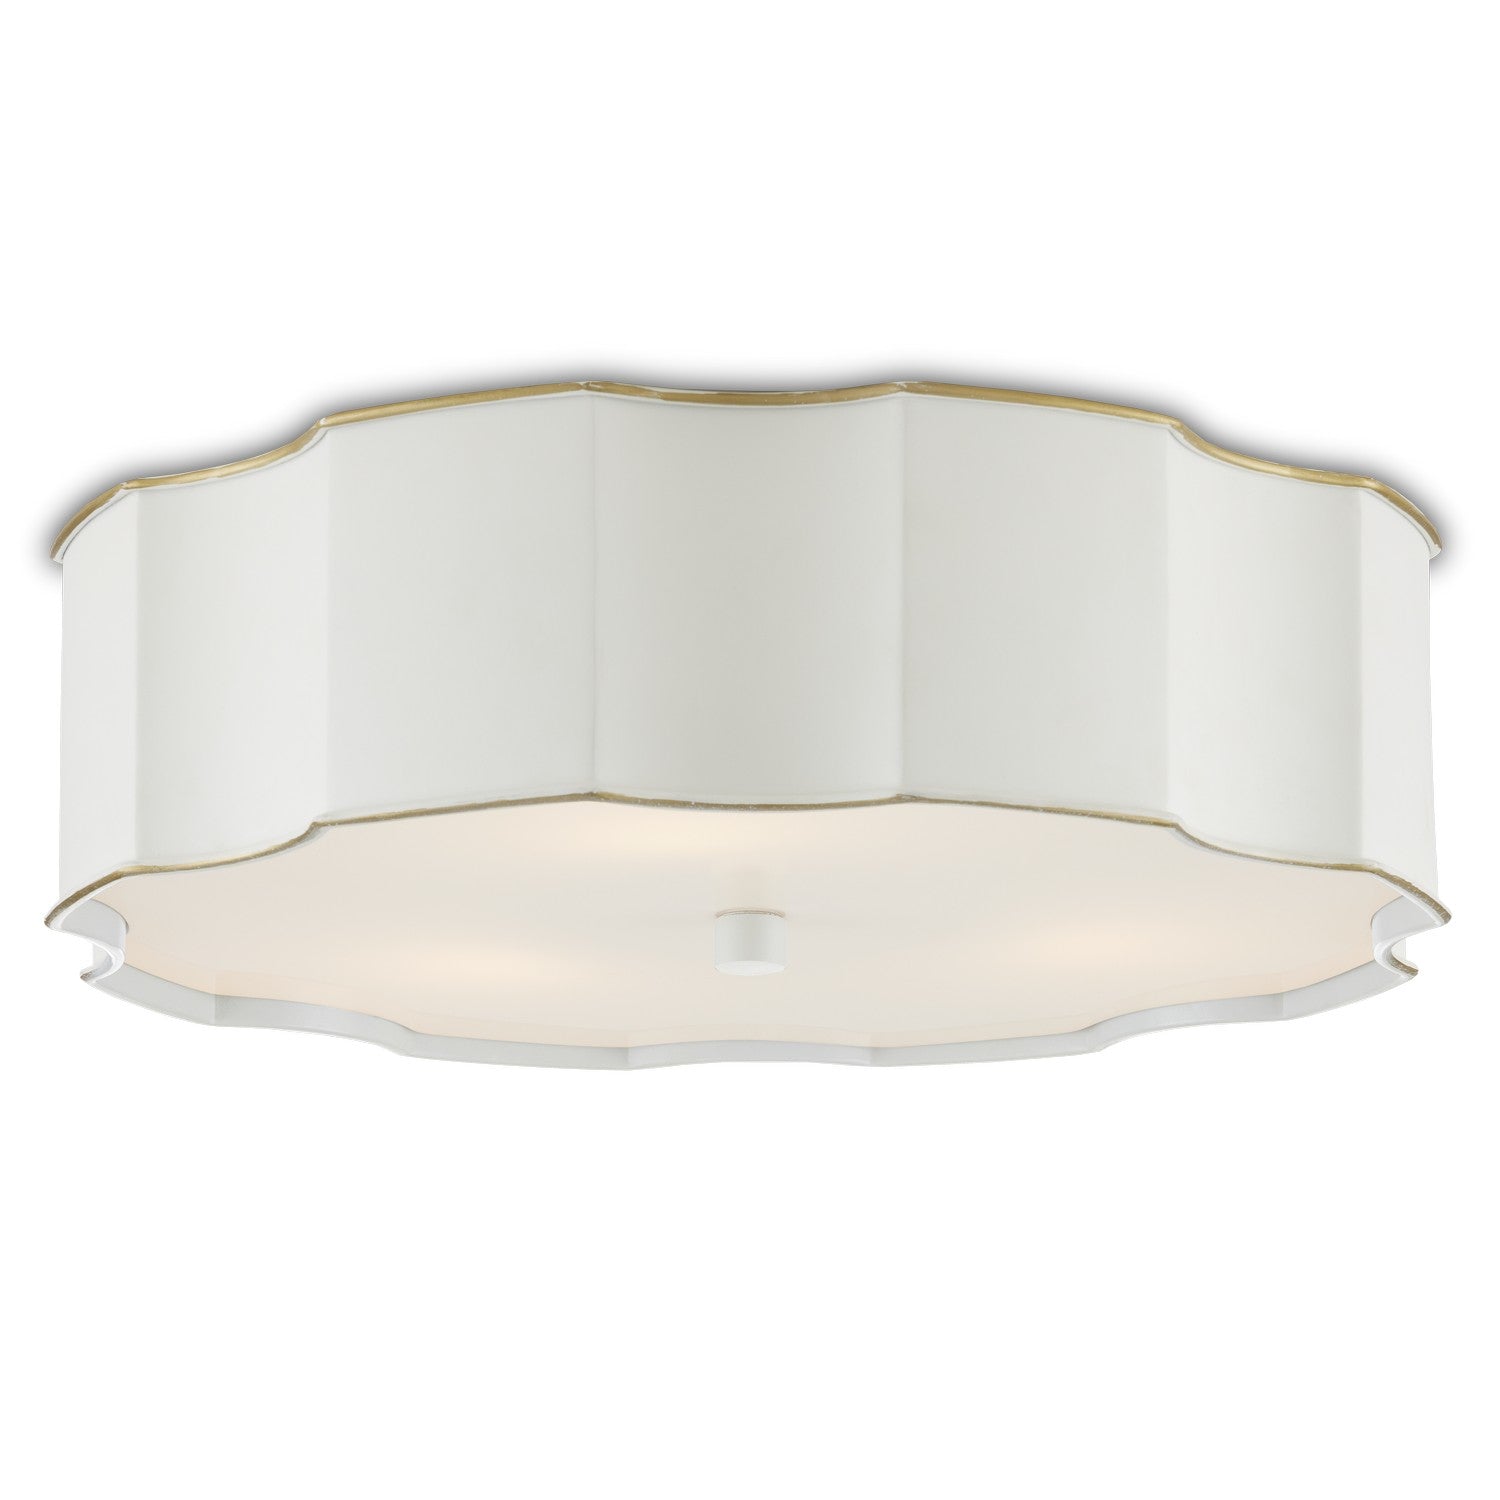 Currey and Company - 9999-0067 - Three Light Flush Mount - Wexford - Snow White/Gold Highlights